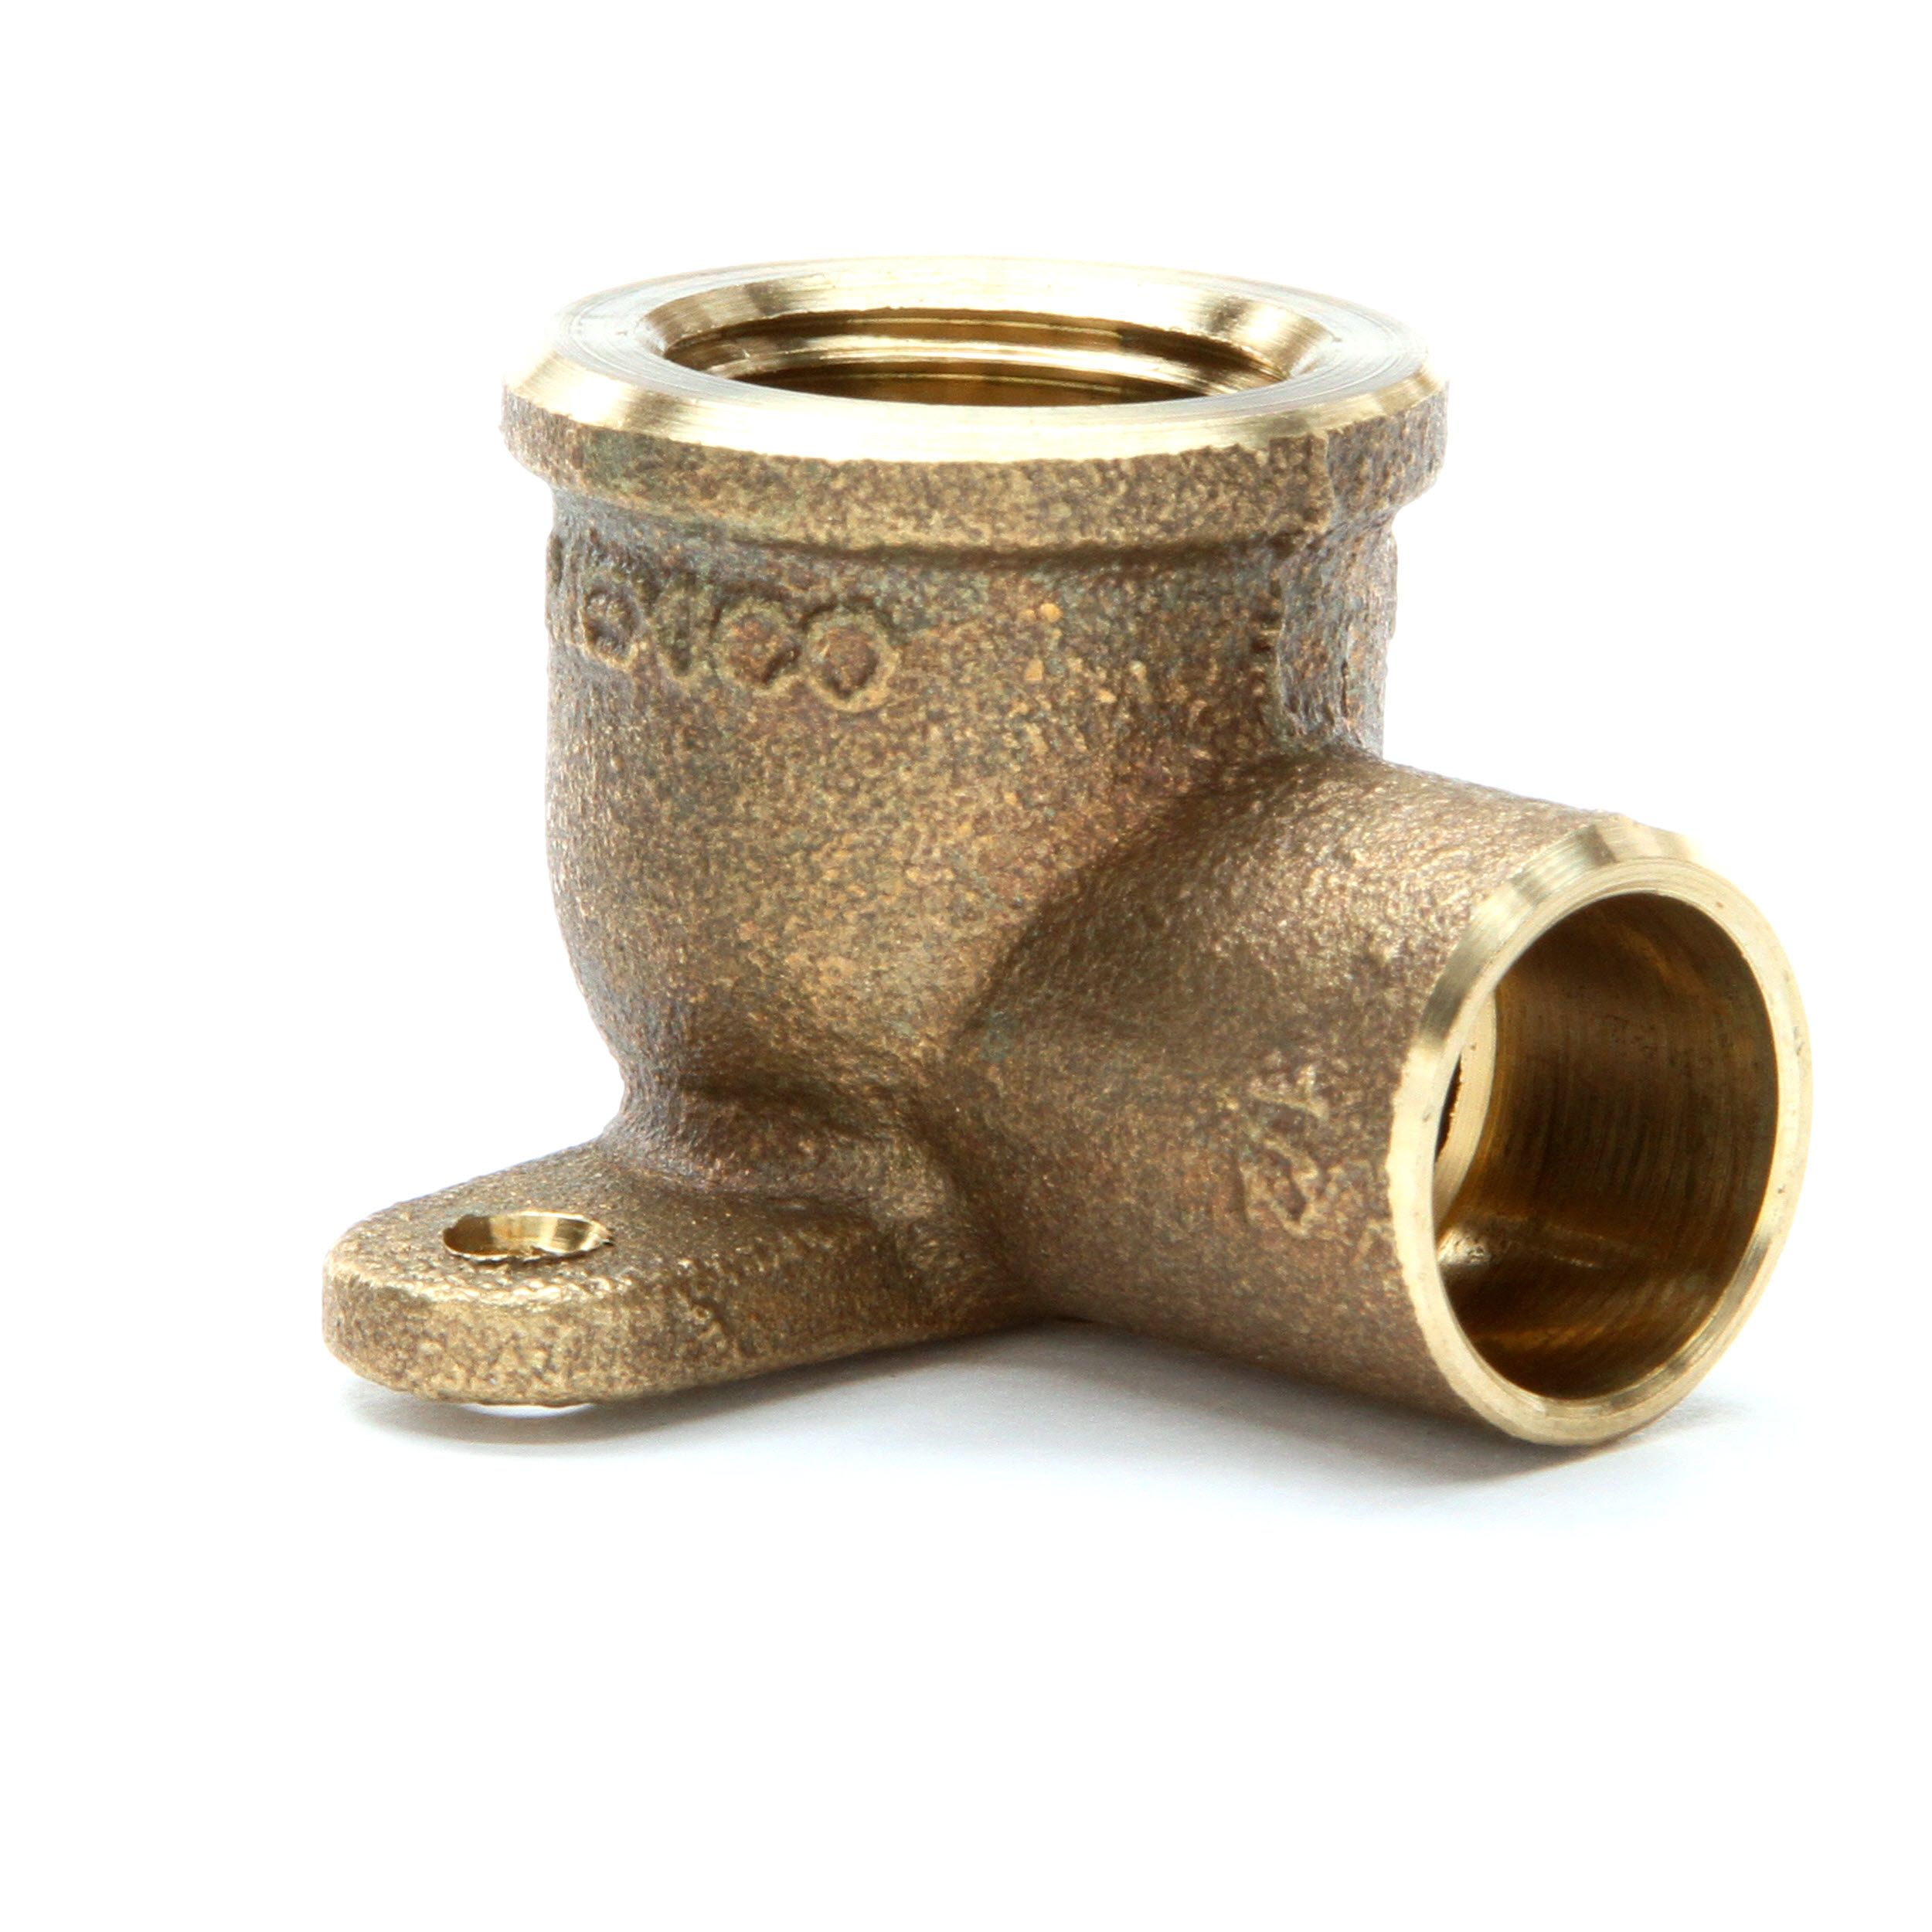 NIBCO 1 /1/2" Copper Elbow 45 Degree Plumbing Pipe Fitting Cl606 for sale online 